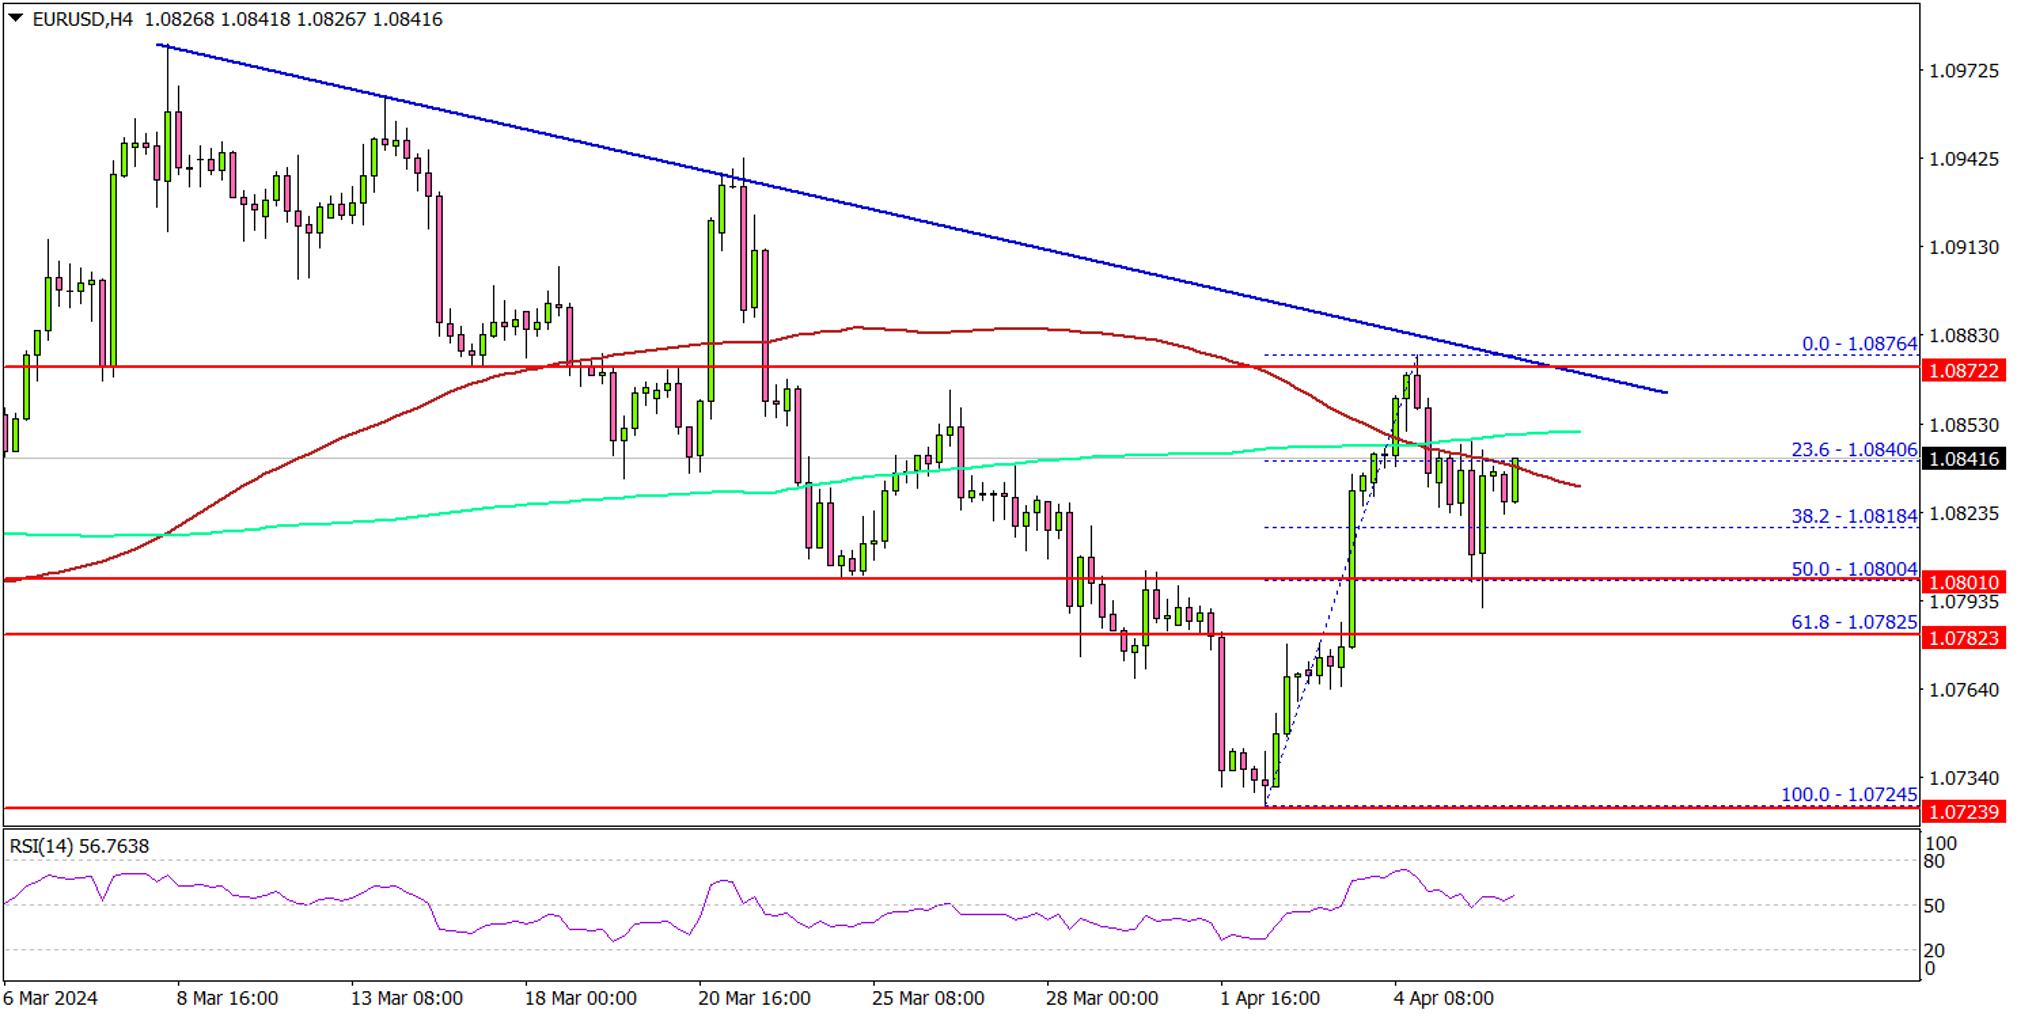 EUR/USD faces hurdles while Gold extends rally